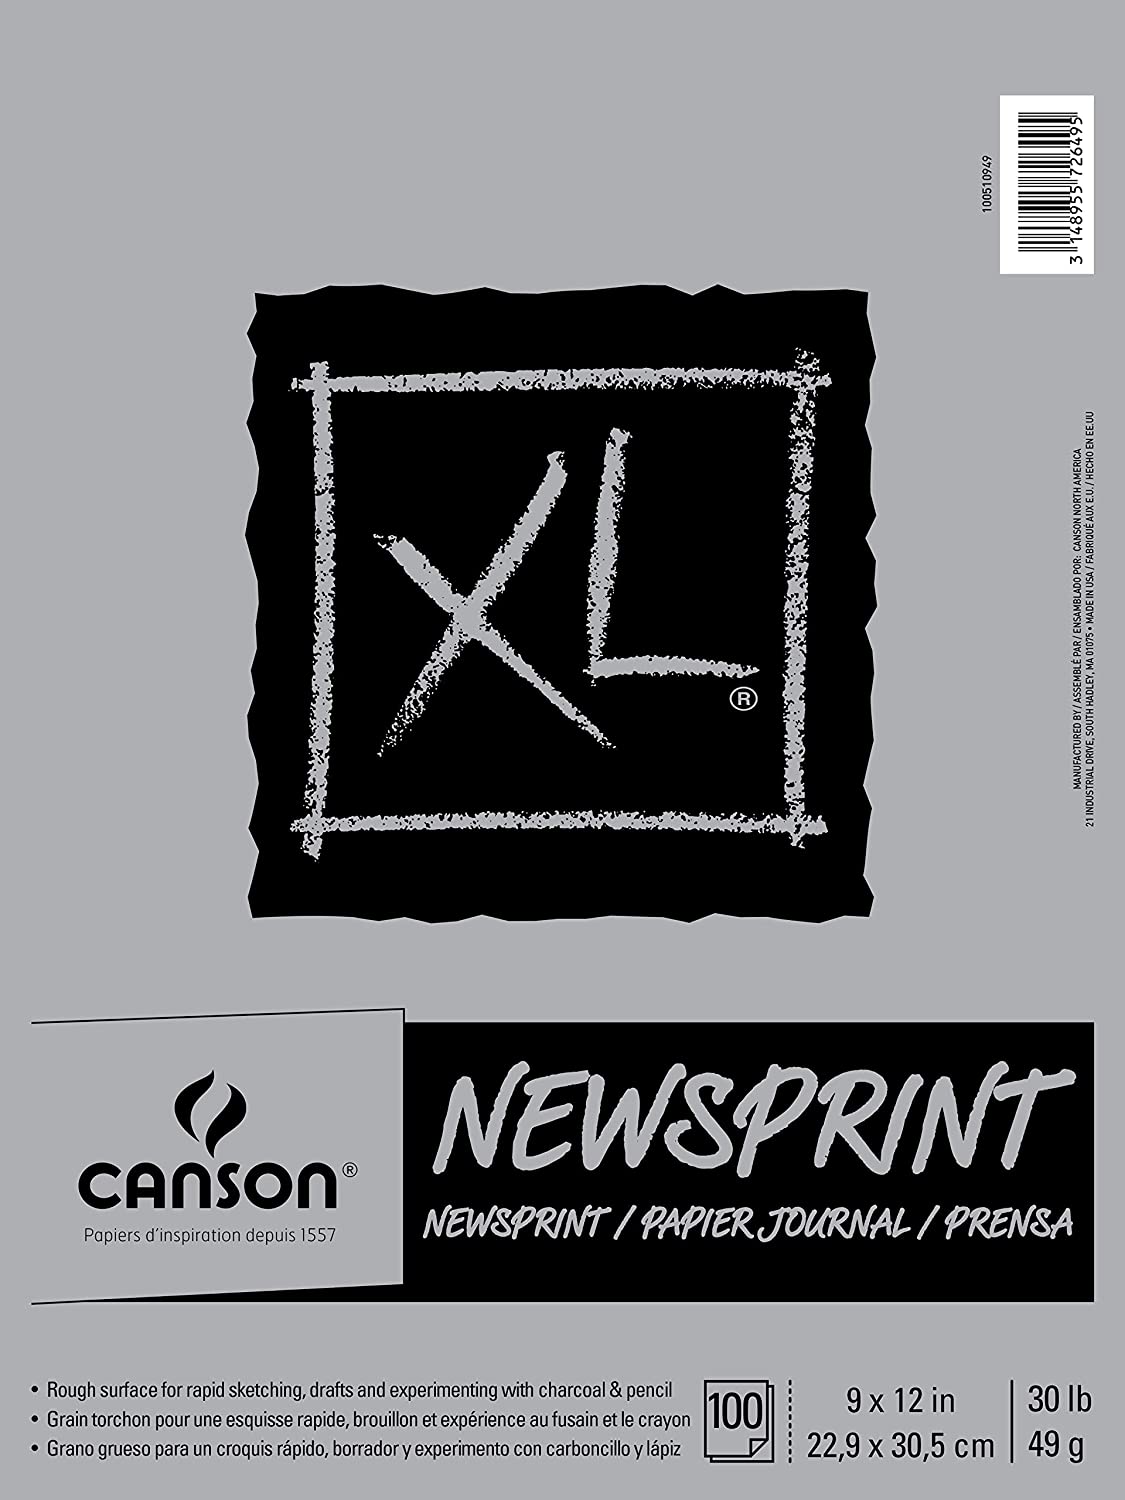 Canson XL Series Newsprint Paper Pad, for Charcoal and Pencil, Fold Over, 30 Pound, 9 x 12 Inch, 100 Sheets, 9″ x 12″, 0